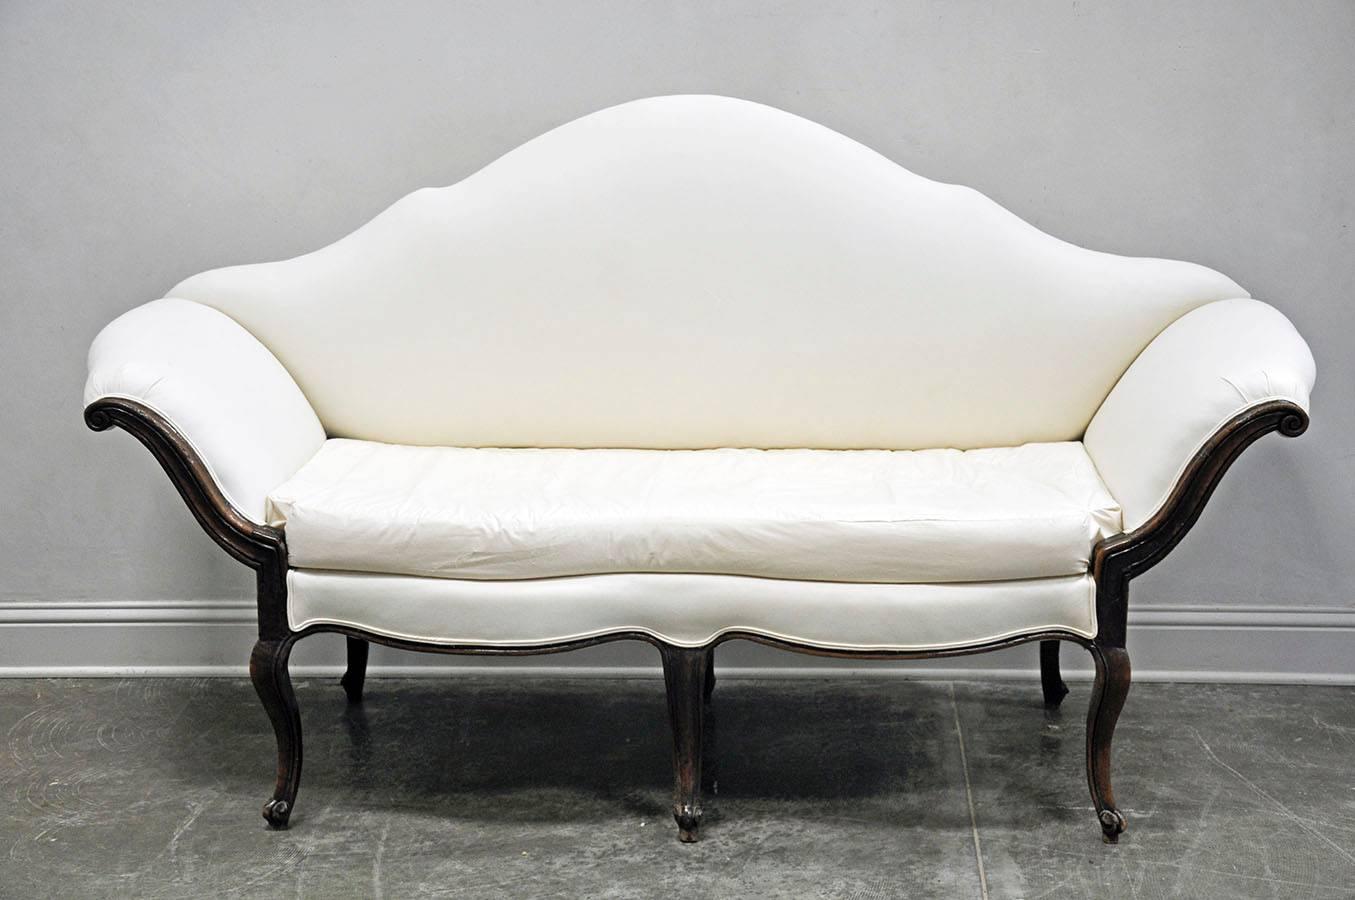 18th century Italian canape with French Louis XV style influence in walnut. Classic Northern Italian styling in nice size and proportion with beautiful patina. Newly upholstered in muslin, the removable back makes this a very versatile addition to